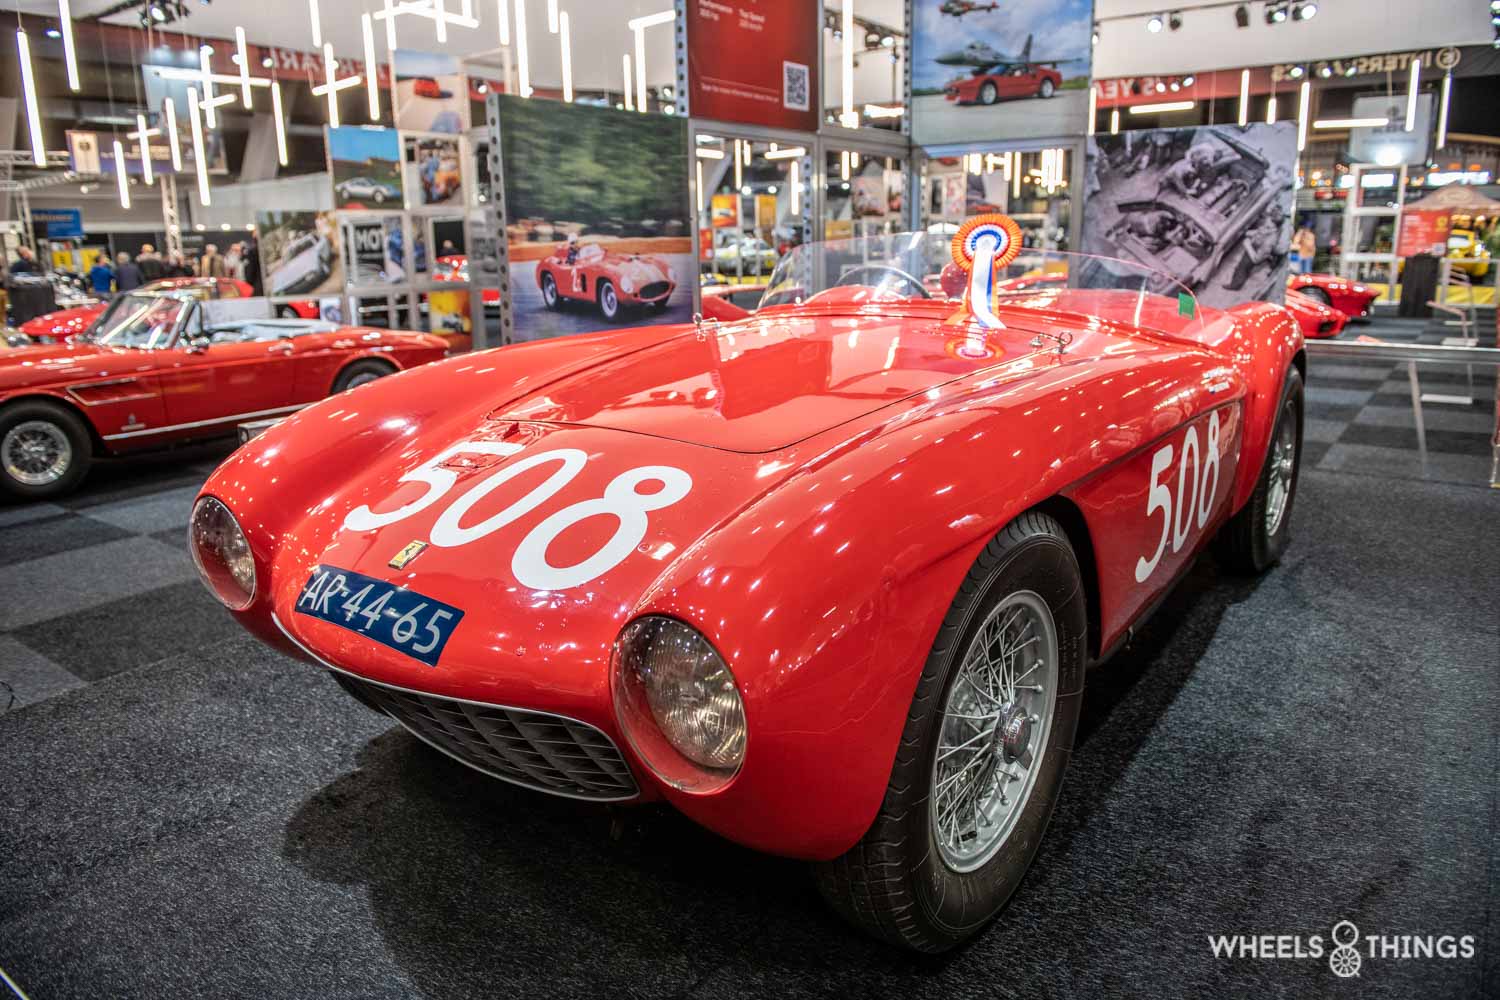 8 Builds From The 2019 Essen Motor Show That Blew Away Expectations